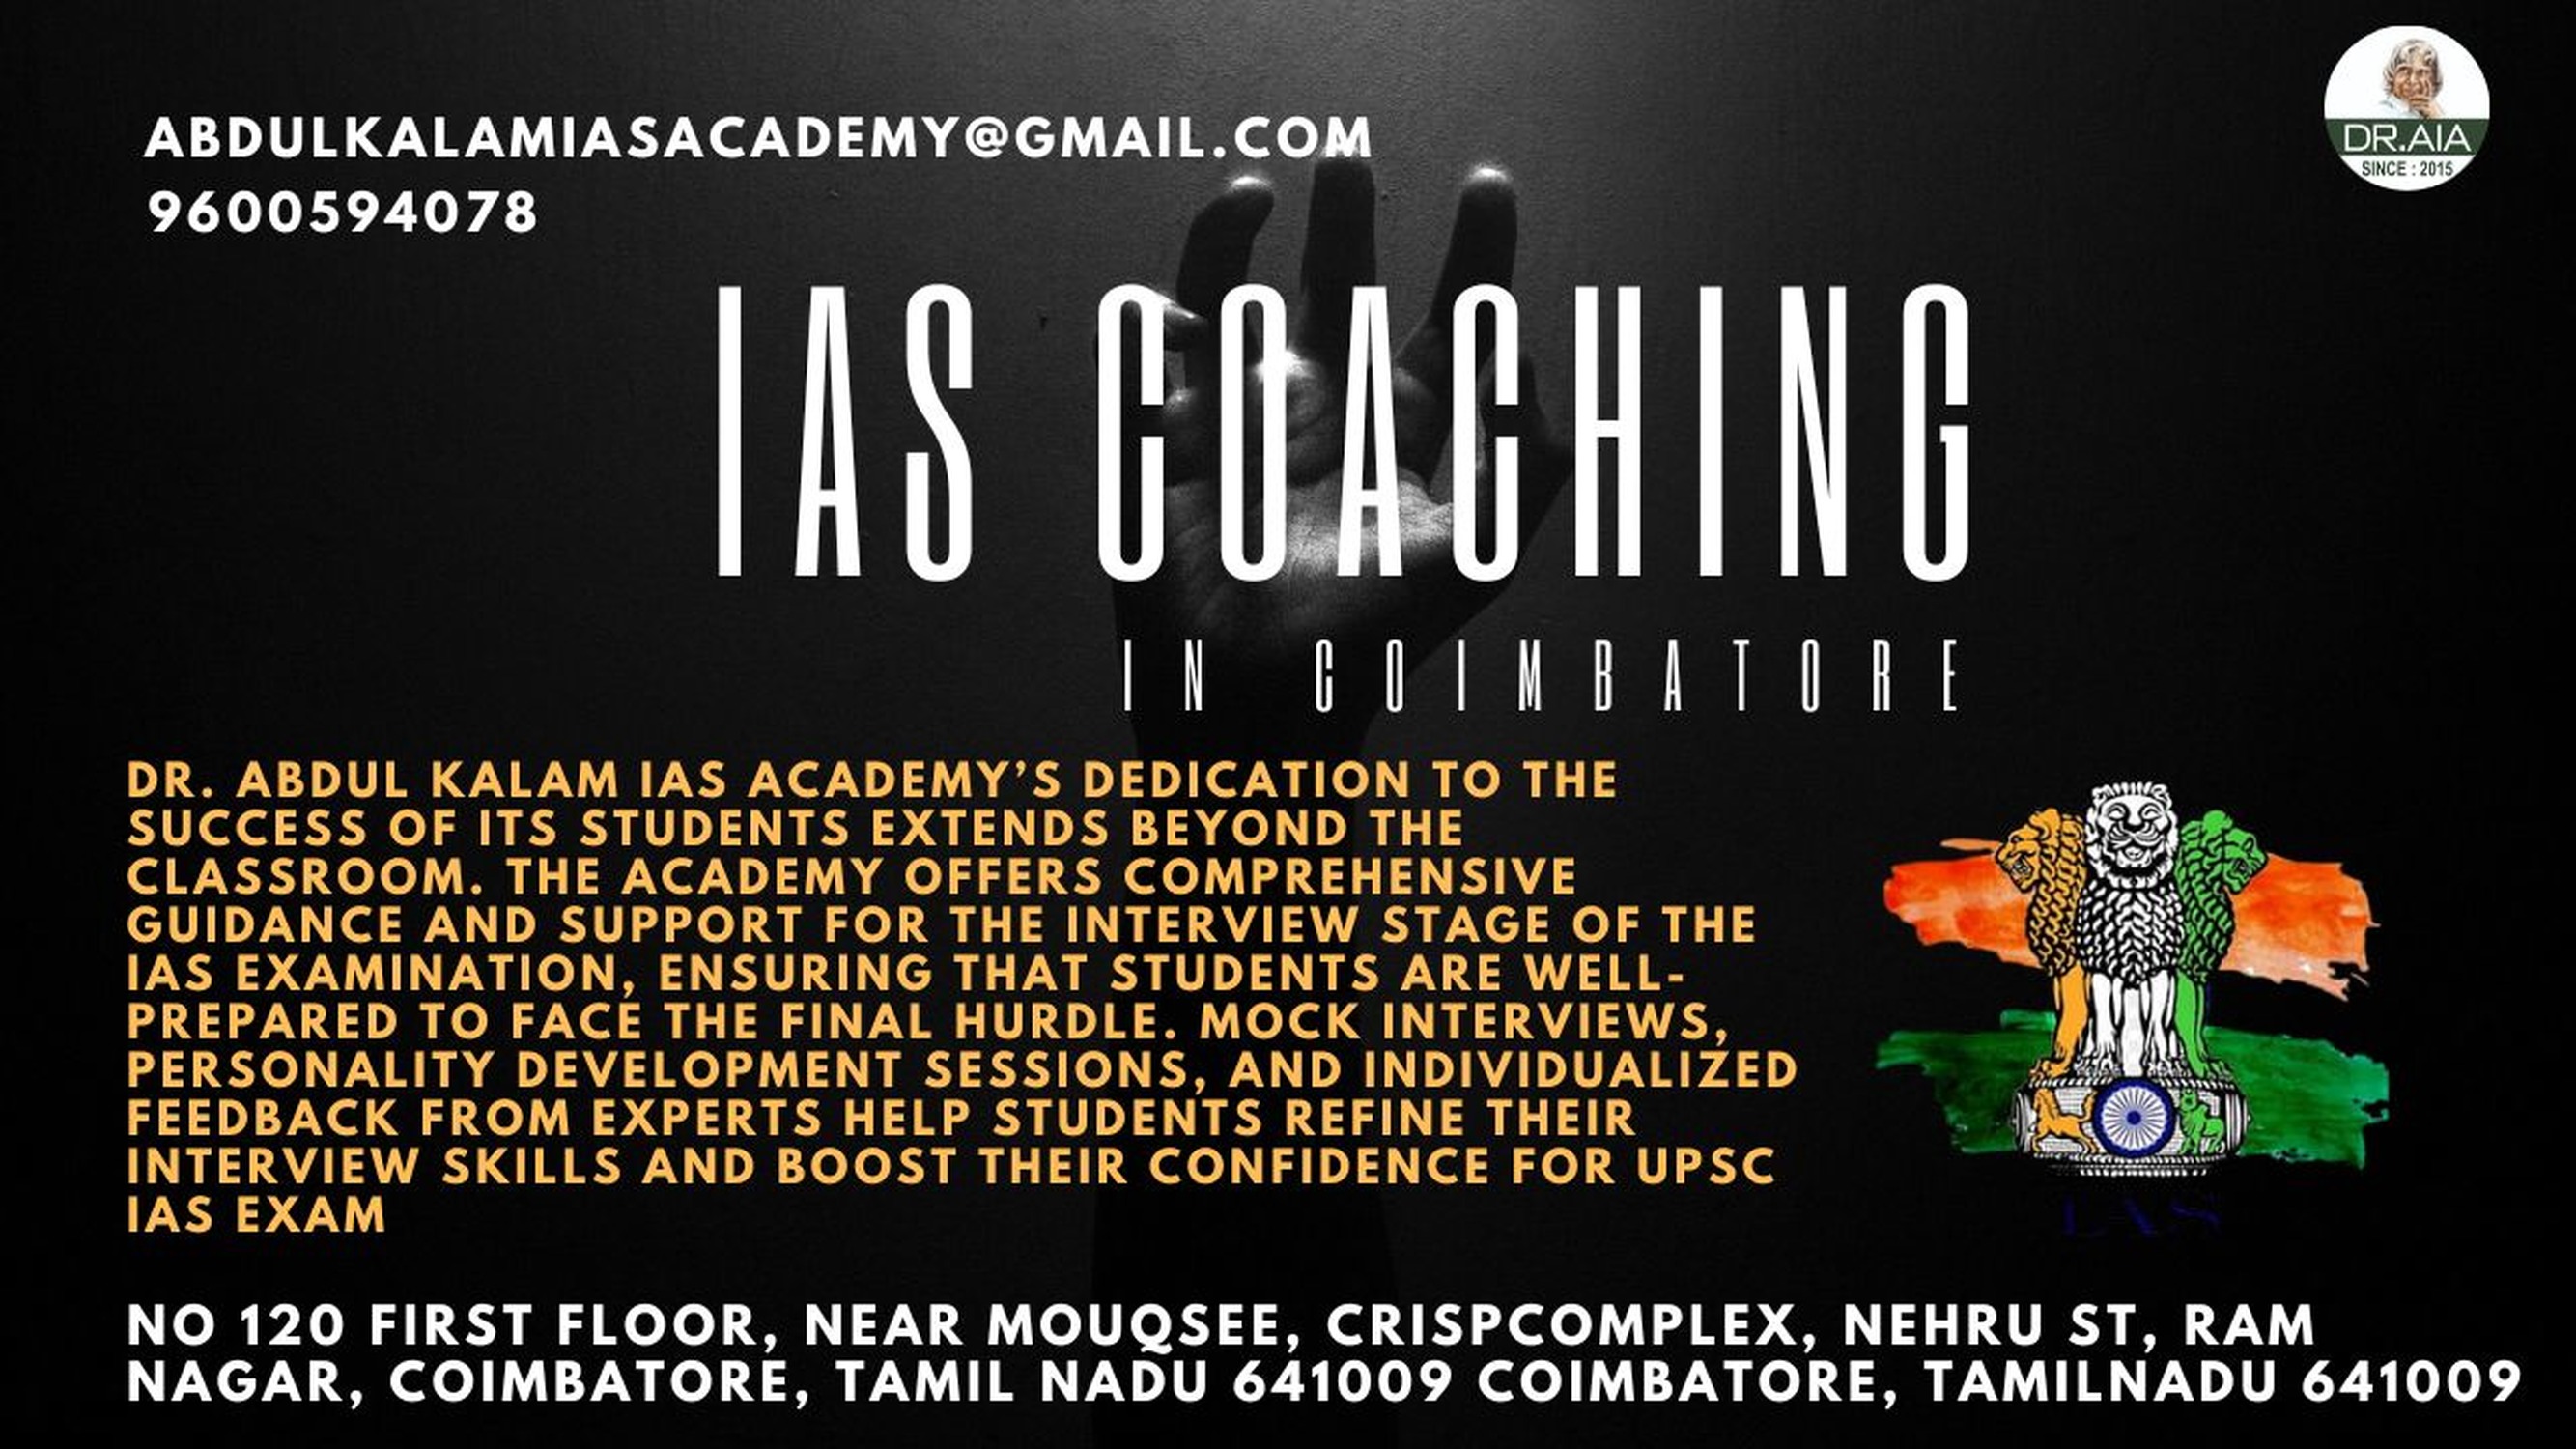 ias coaching in coimbatore 2311, Online Event